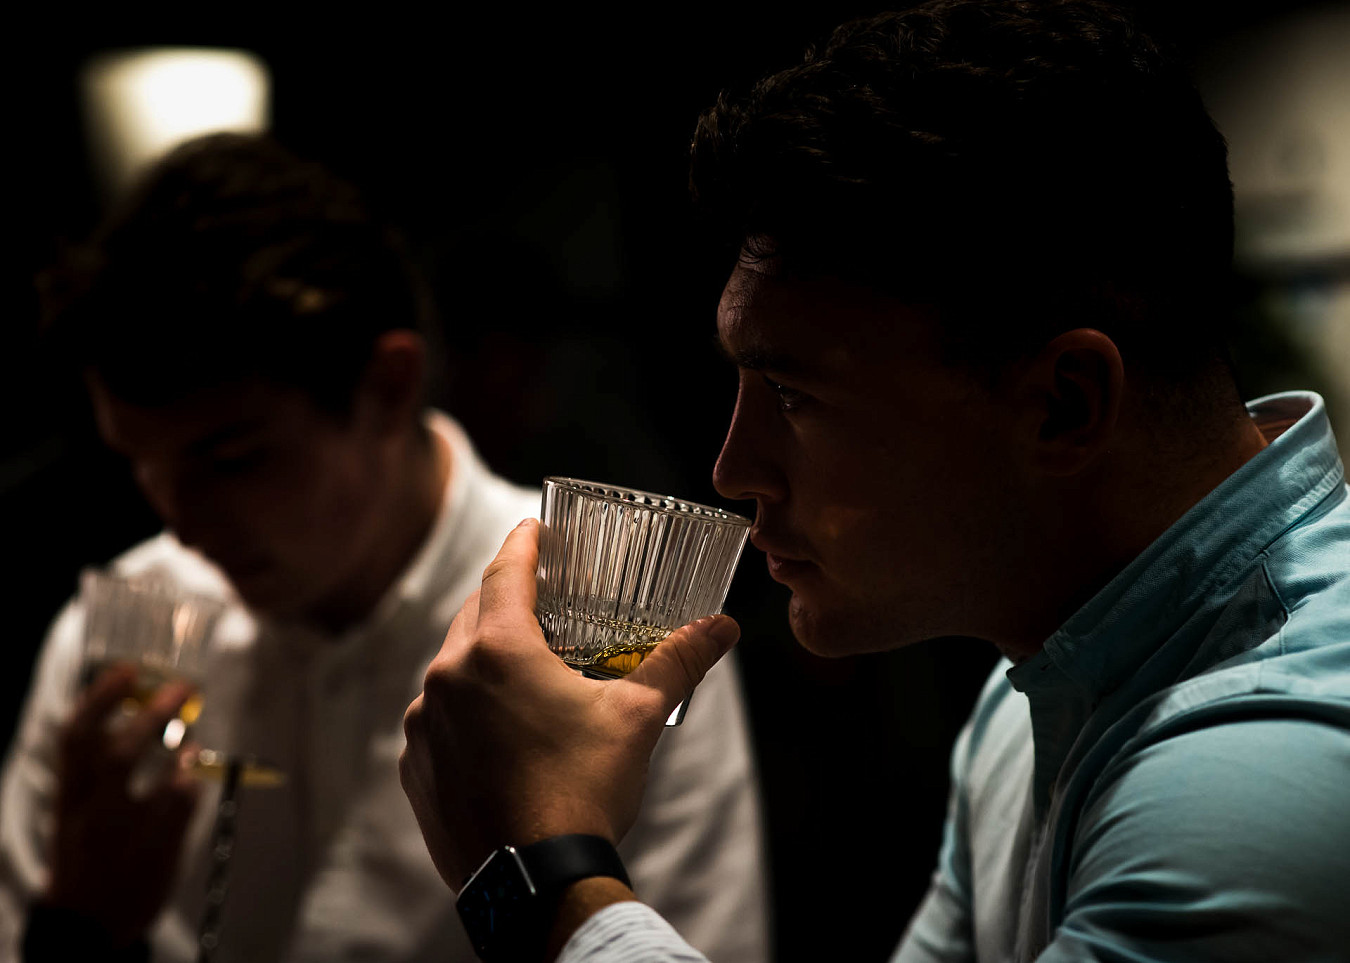 Atmospherically lit photo of two men holding glasses of whisky to their noses to smell before drinking